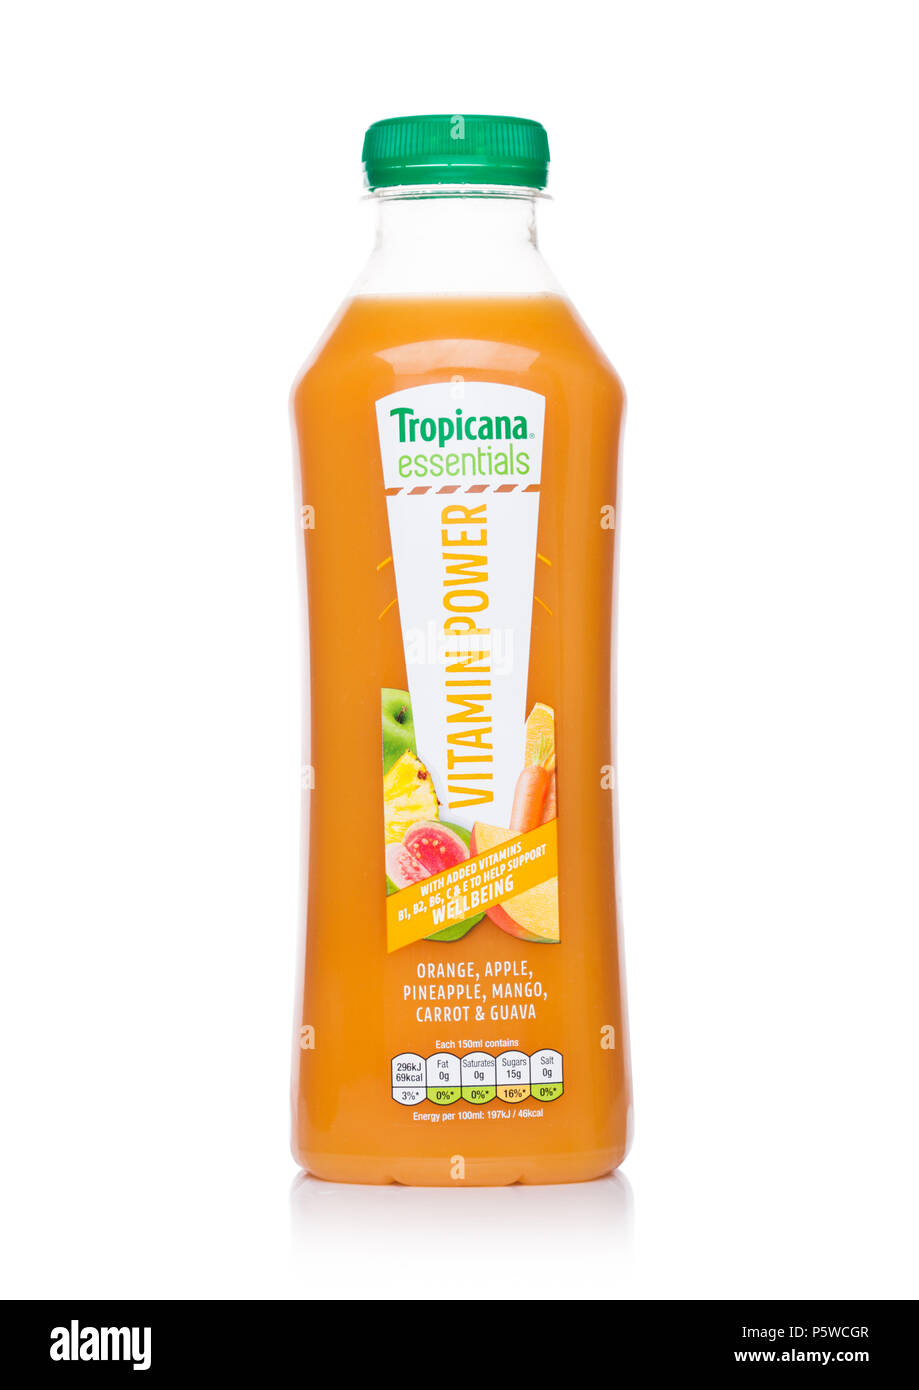 https://c8.alamy.com/comp/P5WCGR/london-uk-june-23-2018-bottle-of-tropicana-essentials-vitamin-power-on-white-backgroundtropicana-products-inc-is-an-american-fruit-juice-compan-P5WCGR.jpg